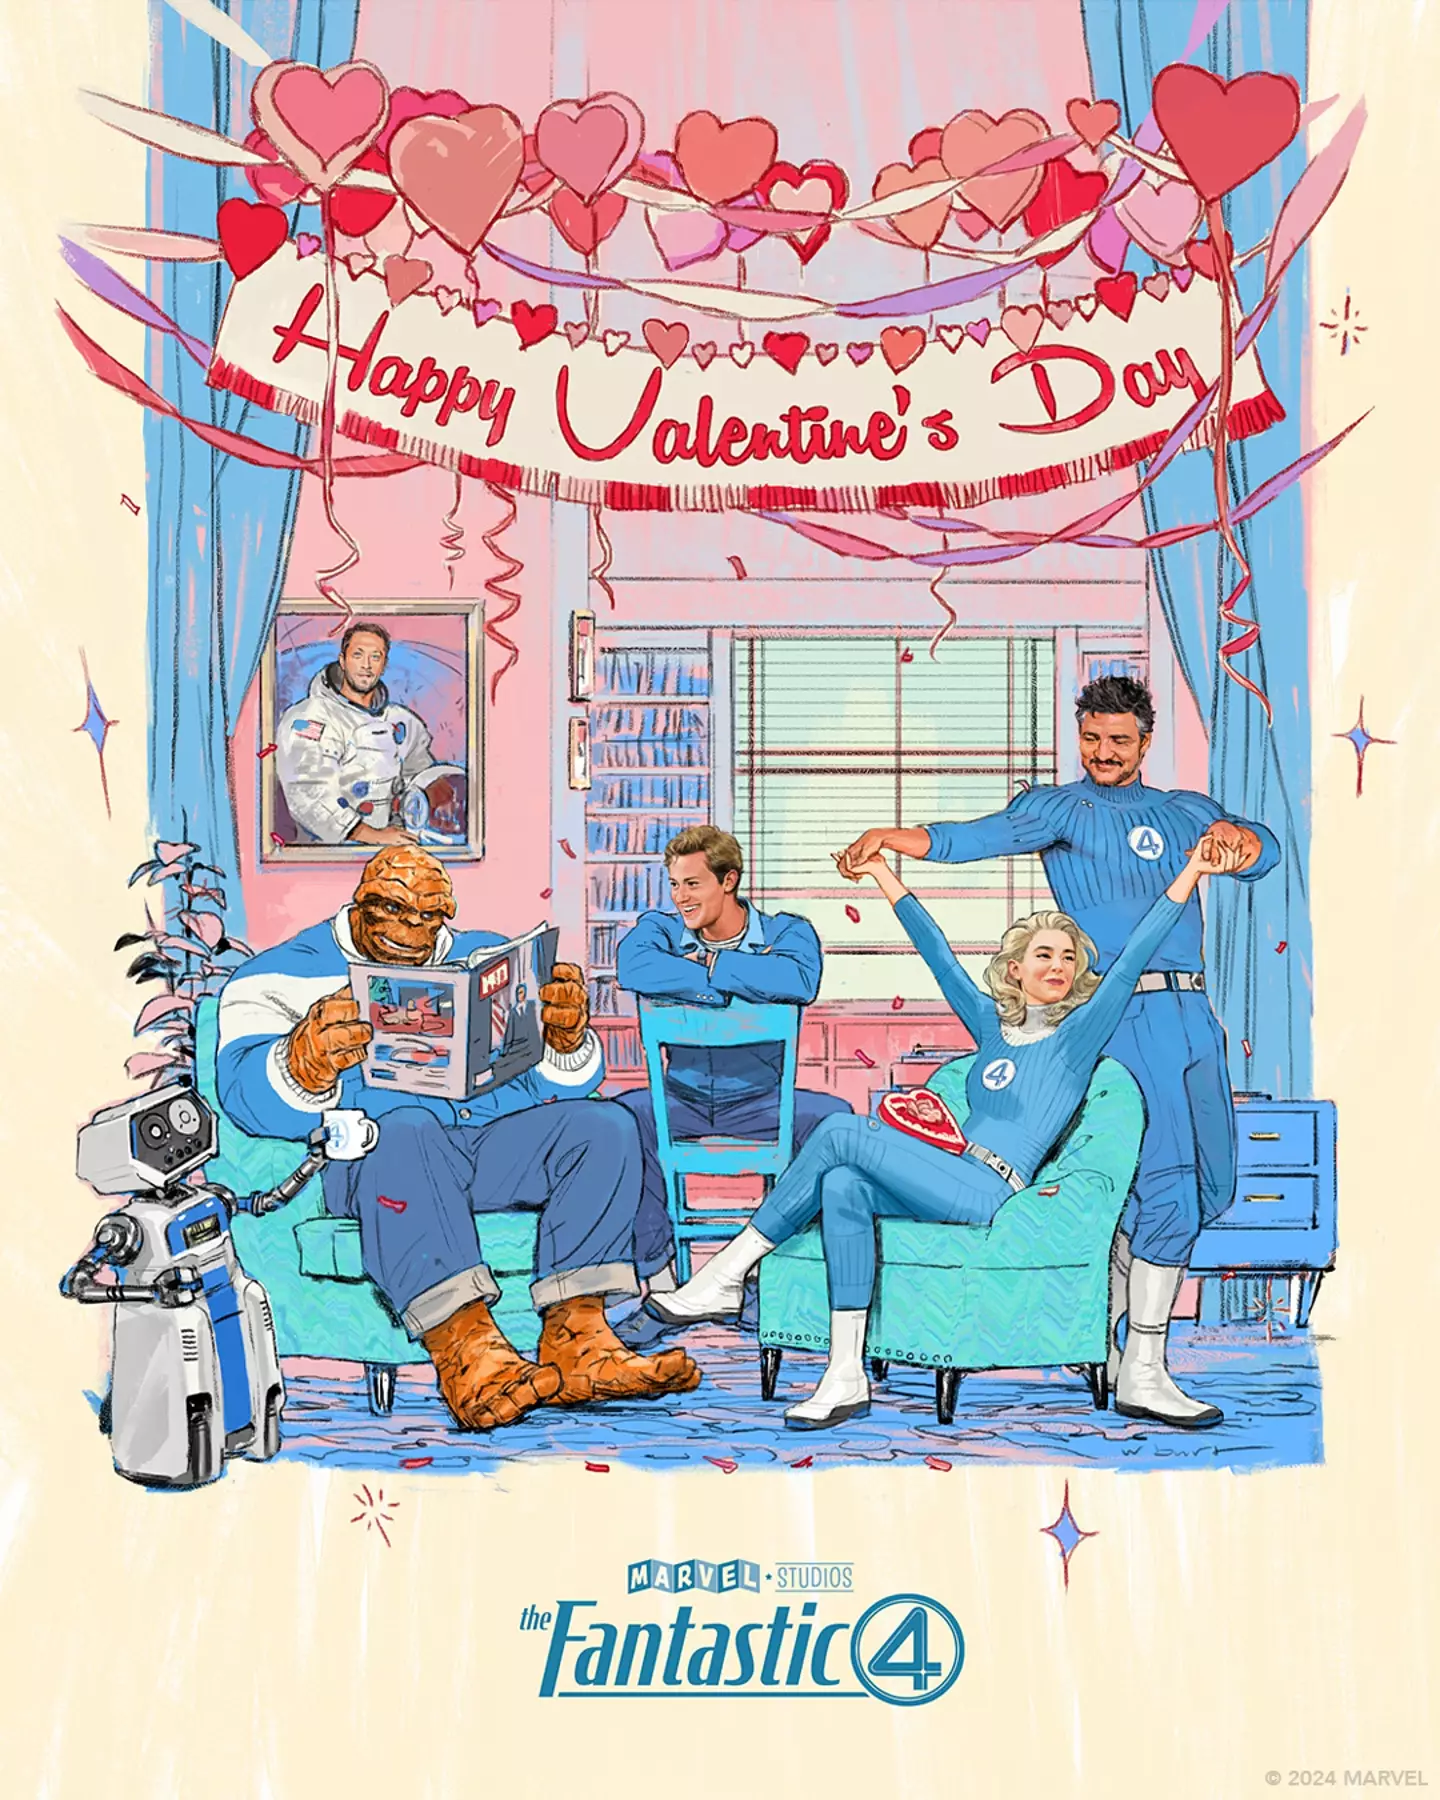 Marvel announced the cast with some incredible artwork on Valentine's Day.